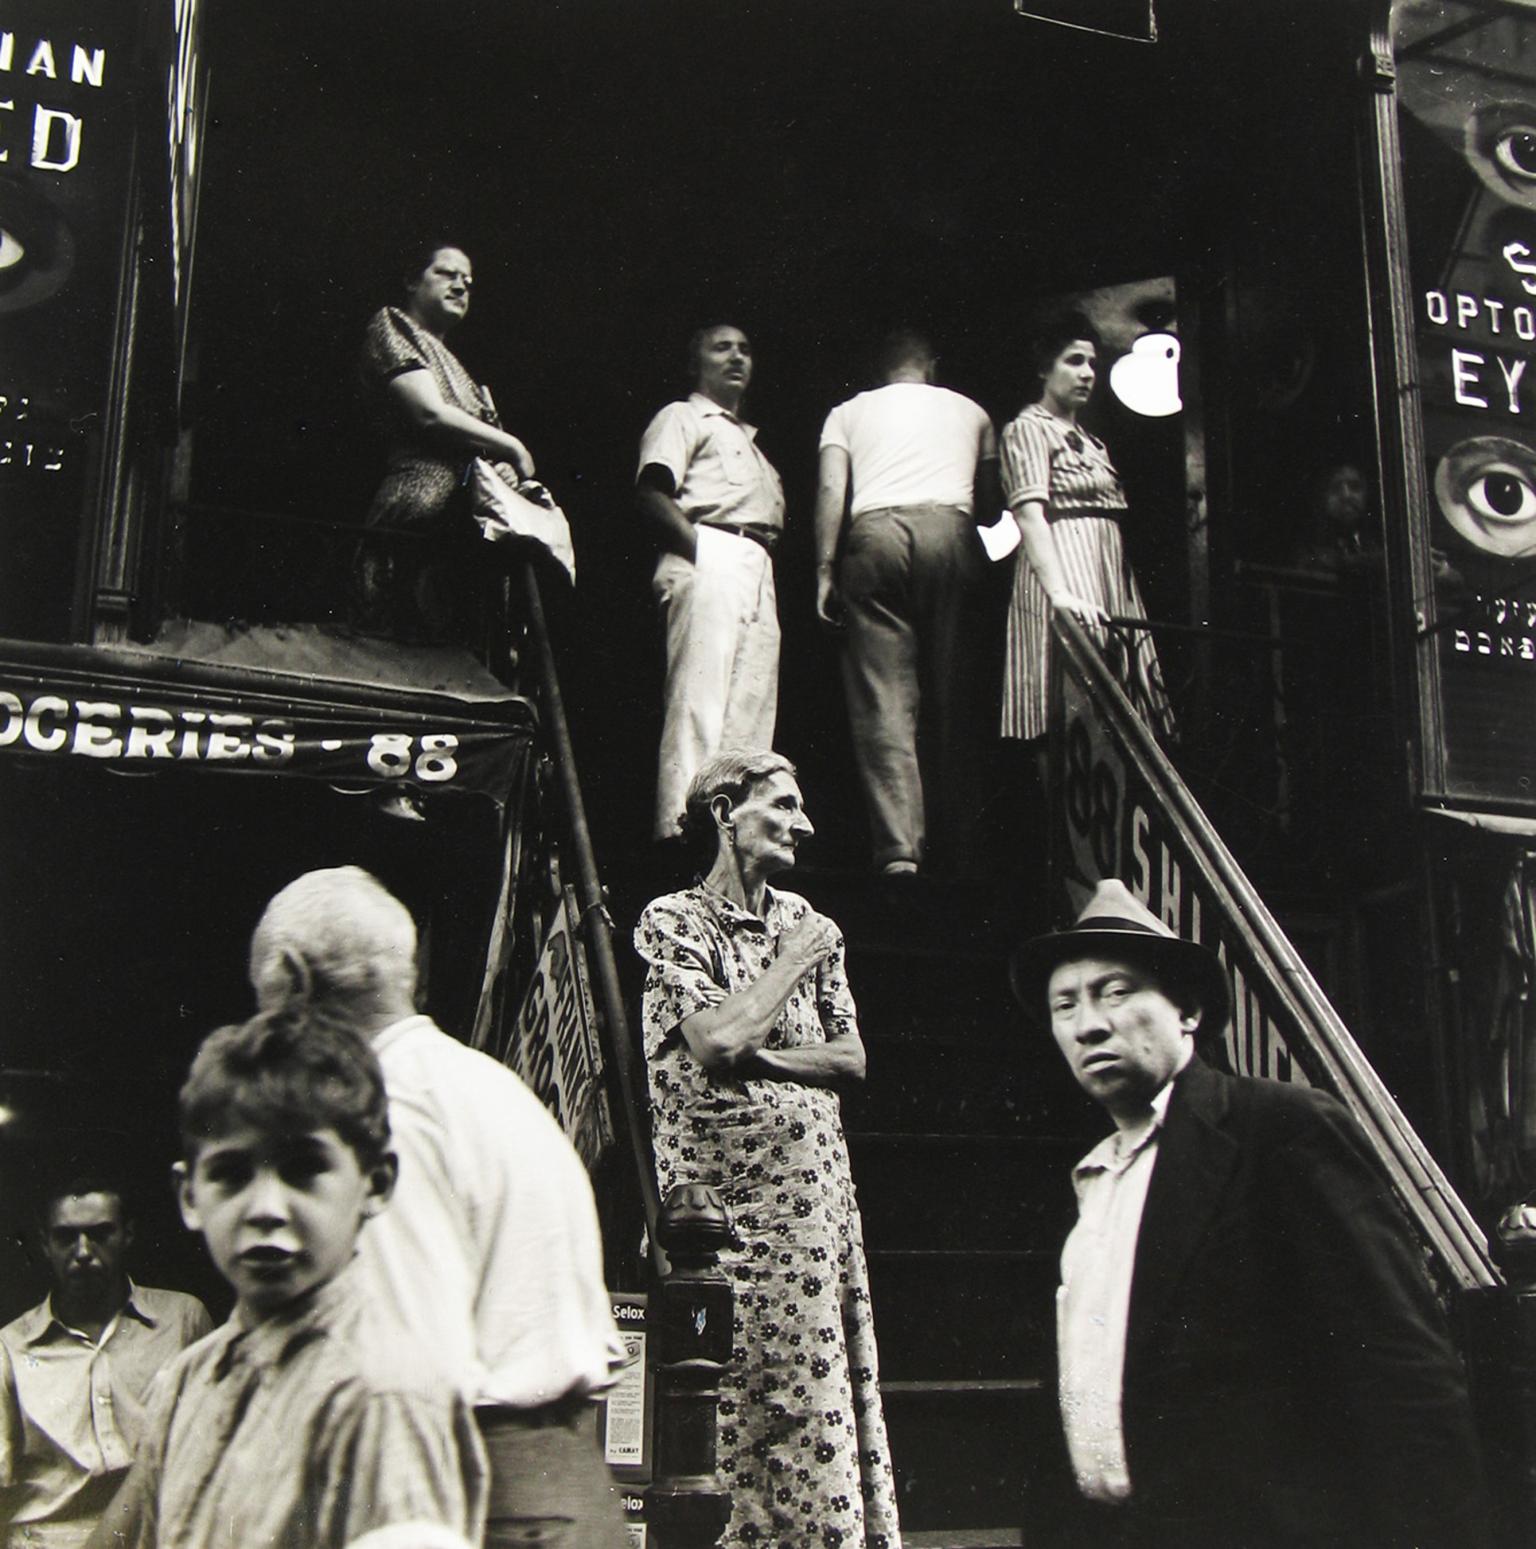 Photograph of people standing outside along stairwell and storefronts.